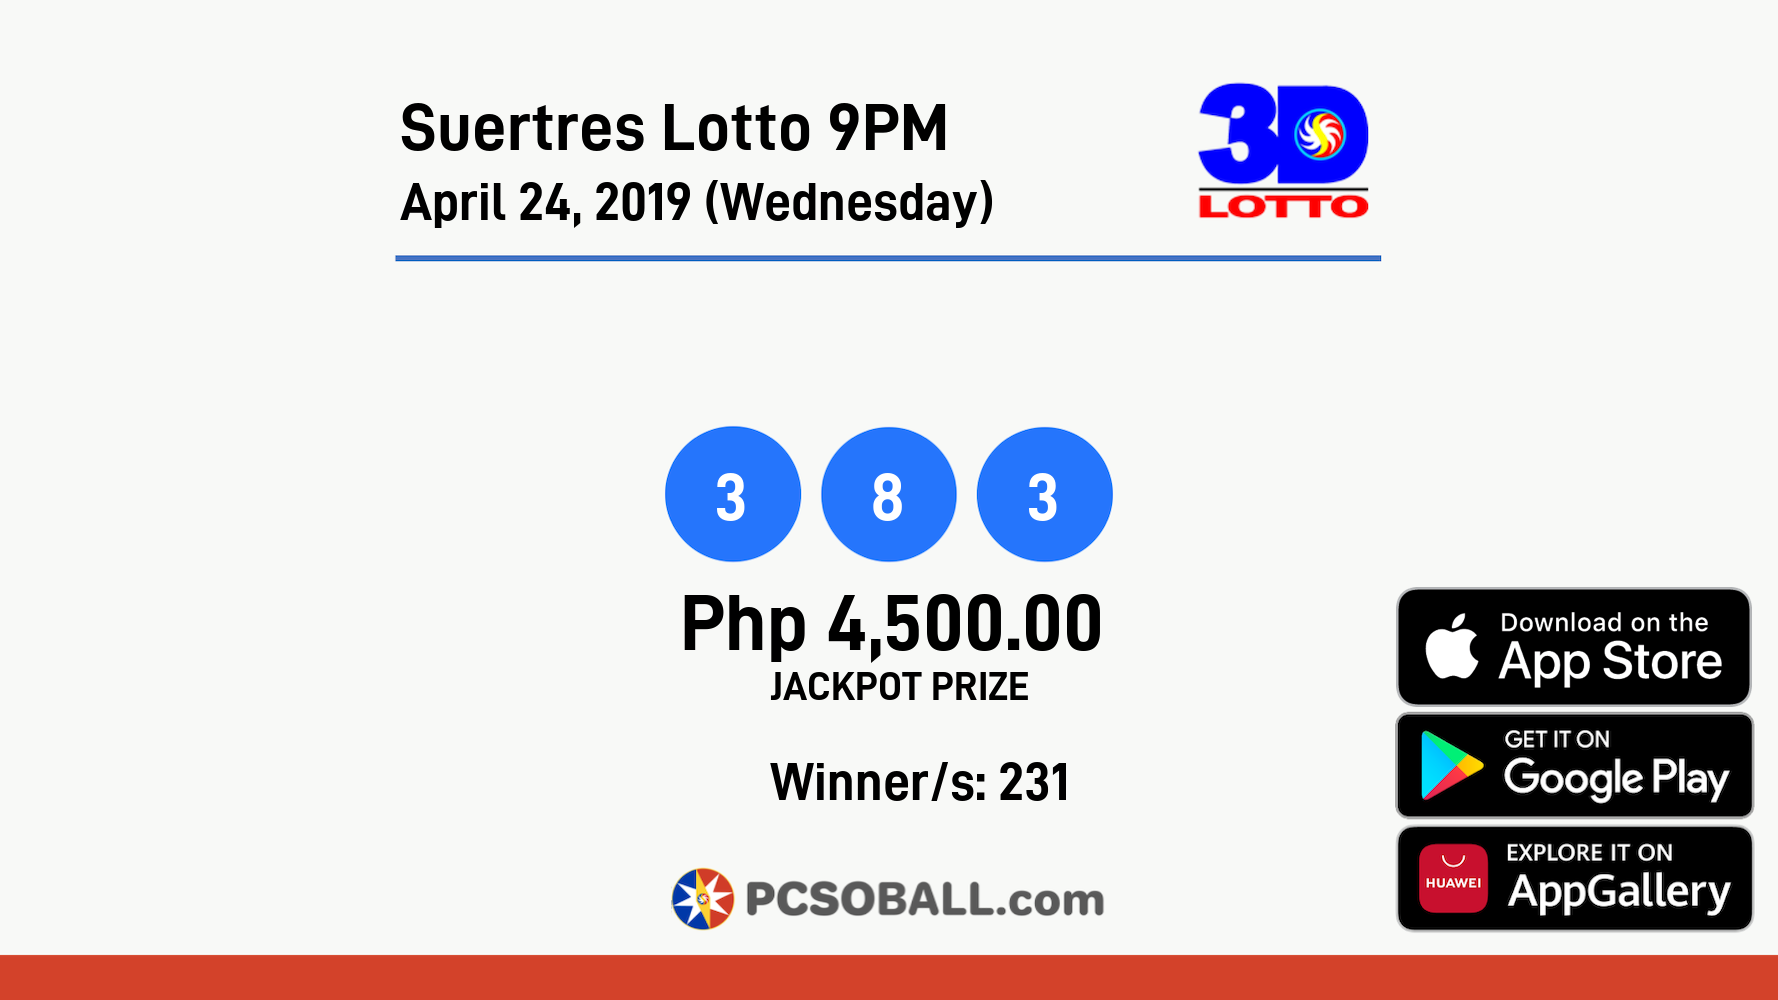 Suertres Lotto 9PM April 24, 2019 (Wednesday) Result